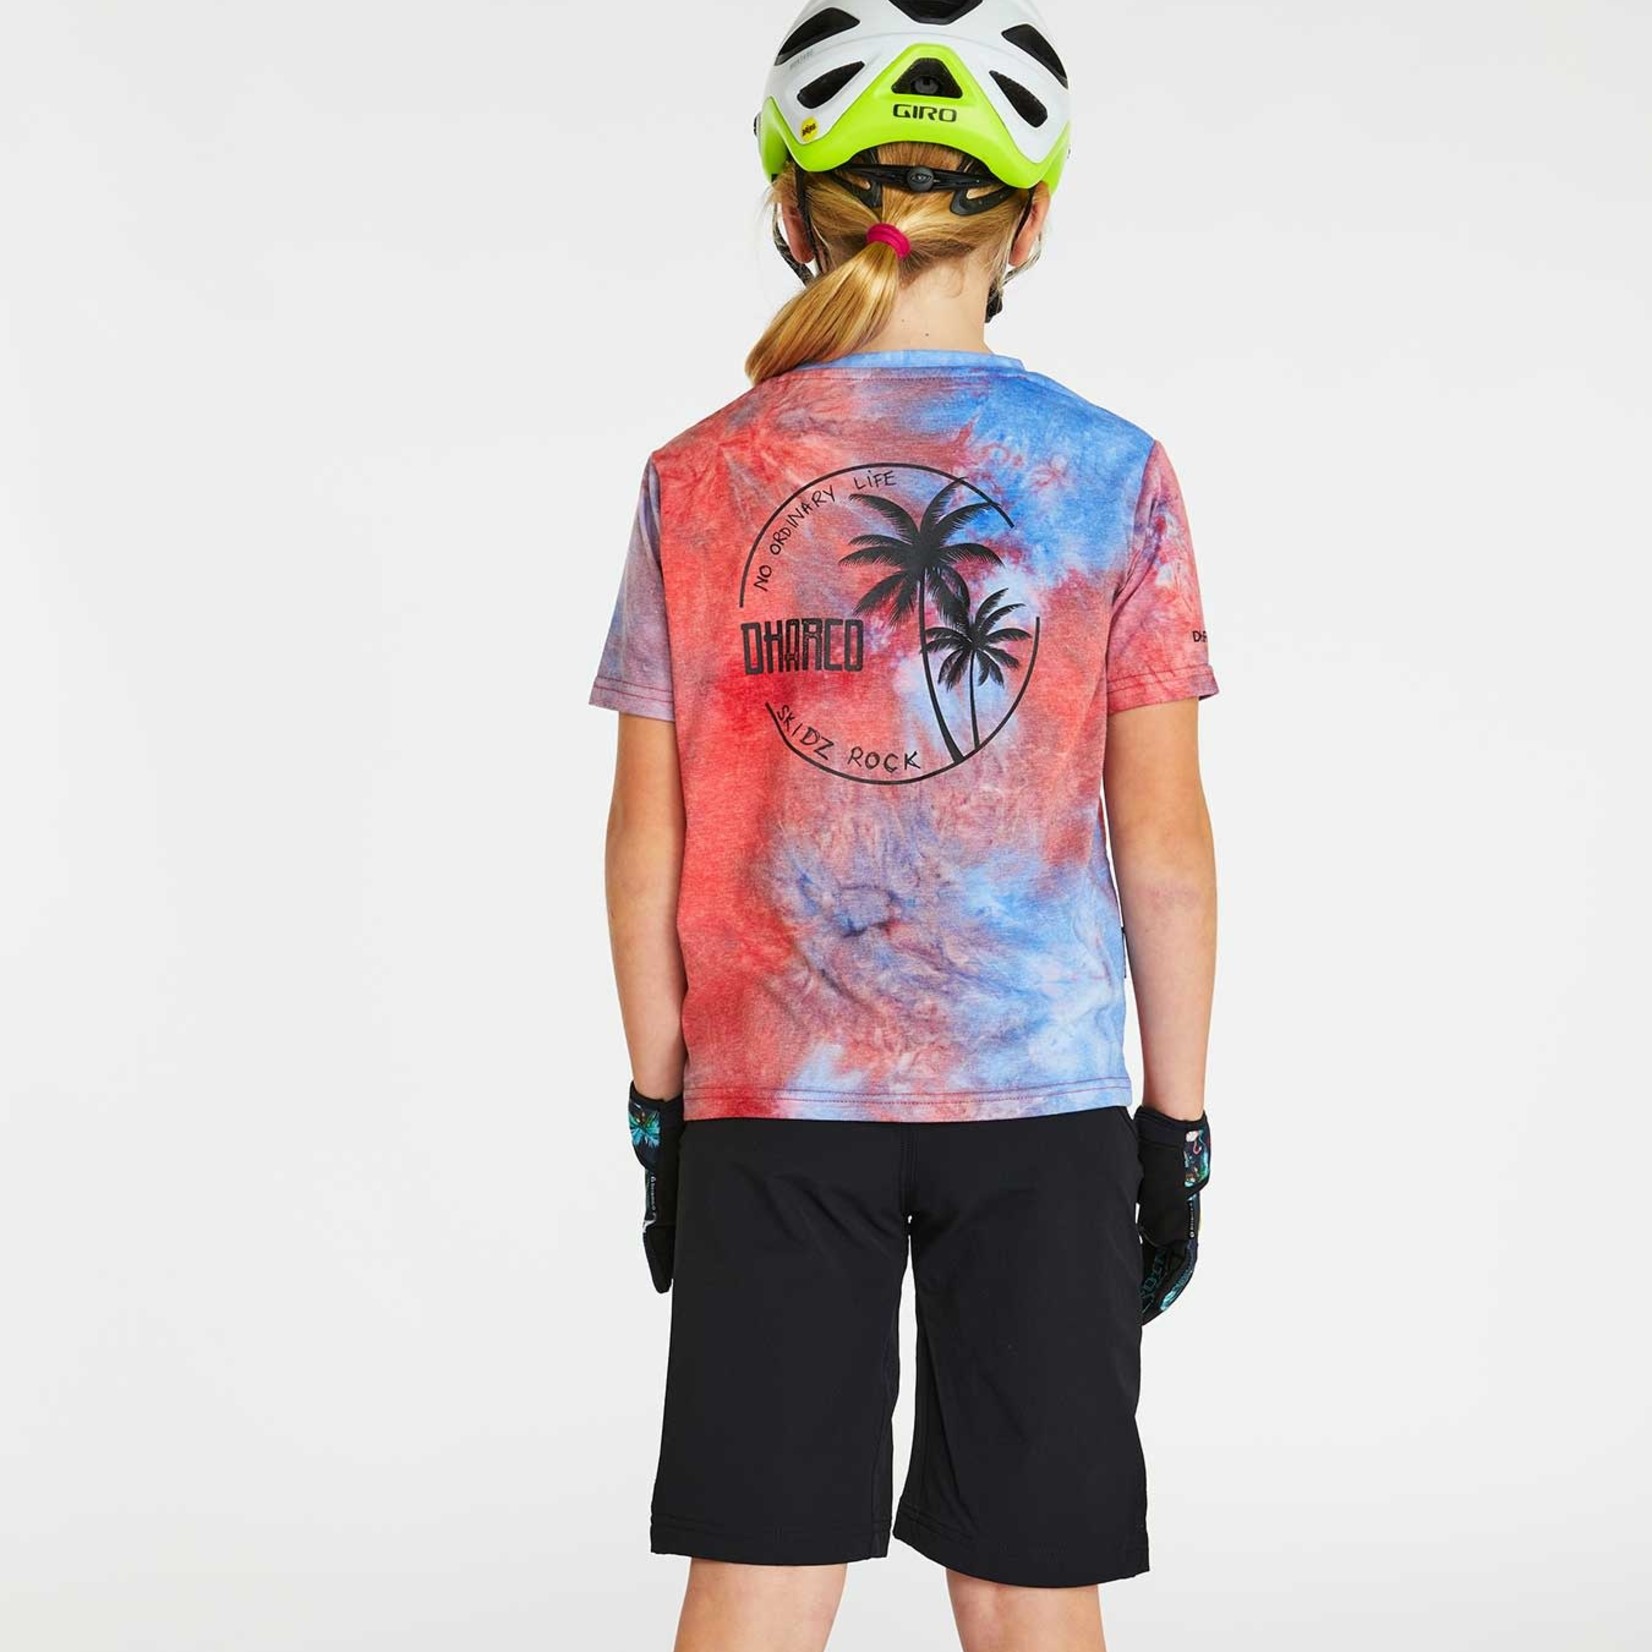 DHaRCO DHaRCO Youth Tech Tee Skids Rock YXXL/14